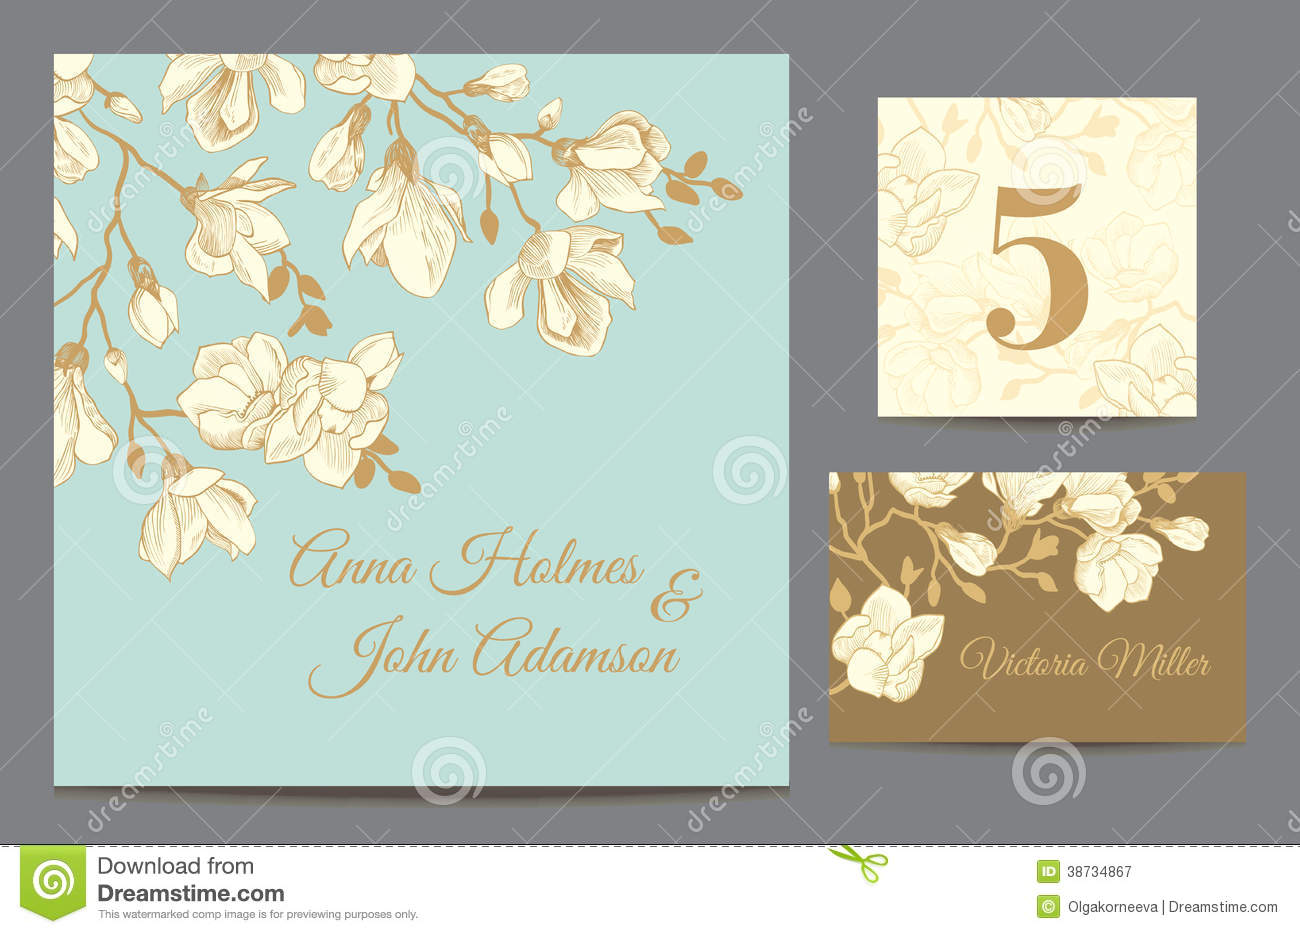 Set Backgrounds To Celebrate The Wedding  Royalty Free Stock